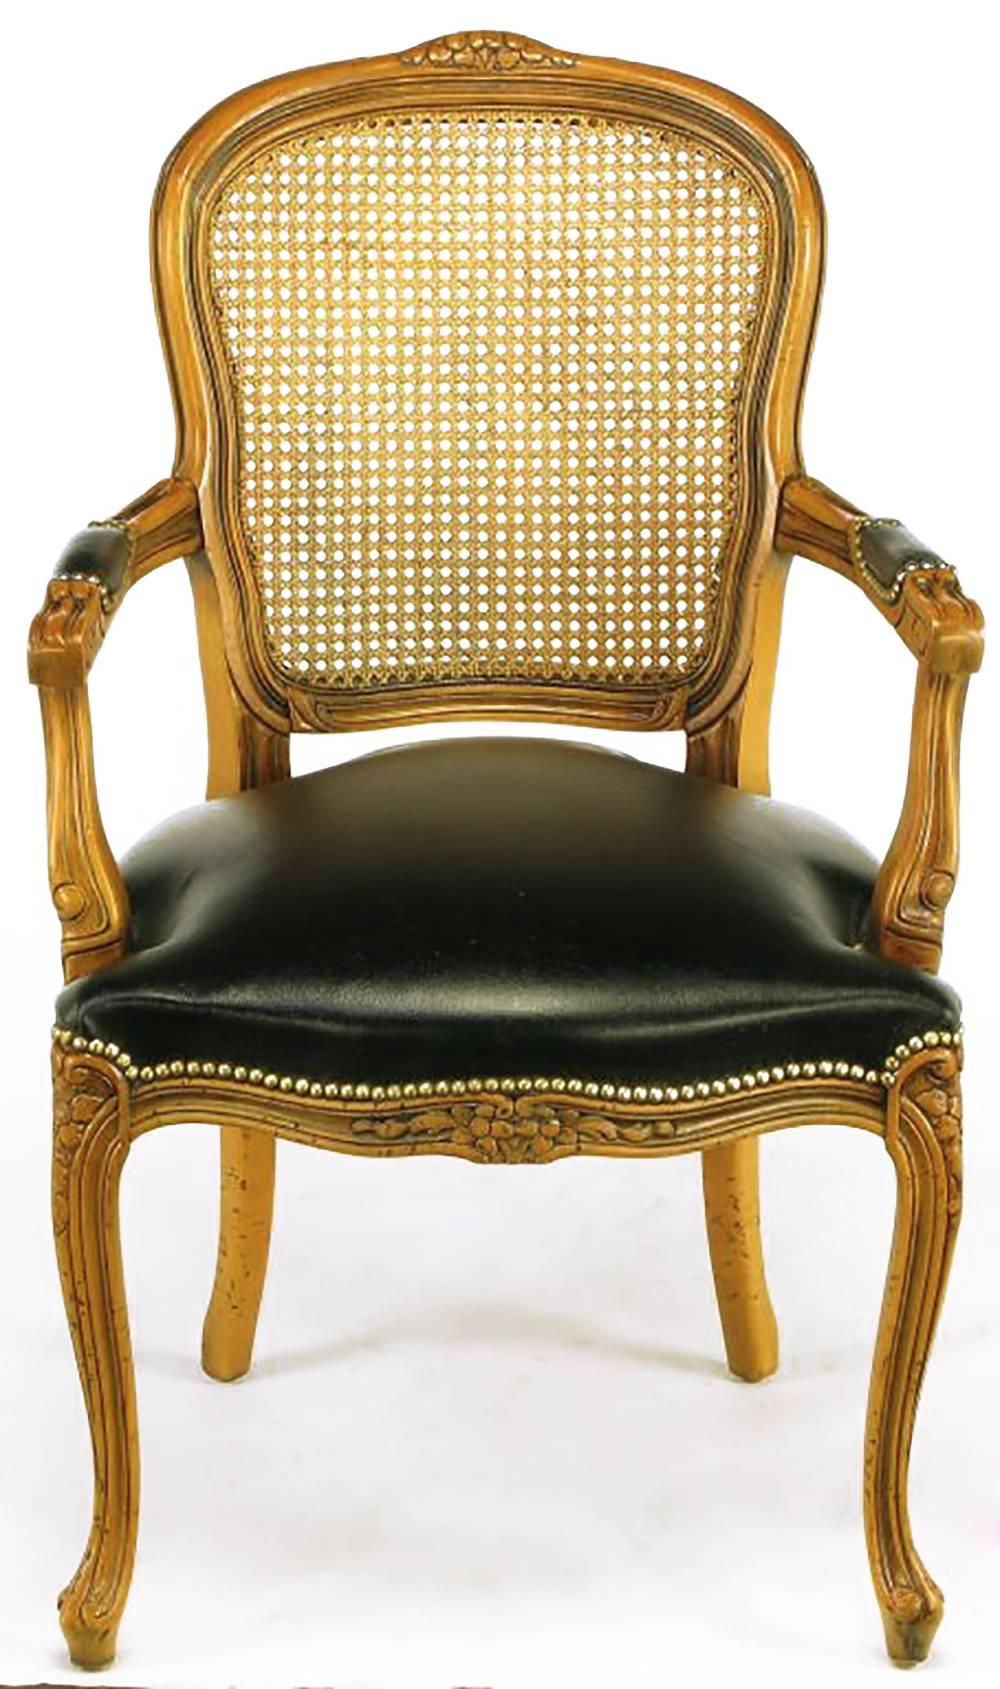 Set of four Louis XV style carved fruitwood armchairs with black leather seats, arm pads and caned backs. Ornately carved apron, turned feet and arms. Finished in a light cherry antiqued glaze with speckled worm hole patina. Brass nail head